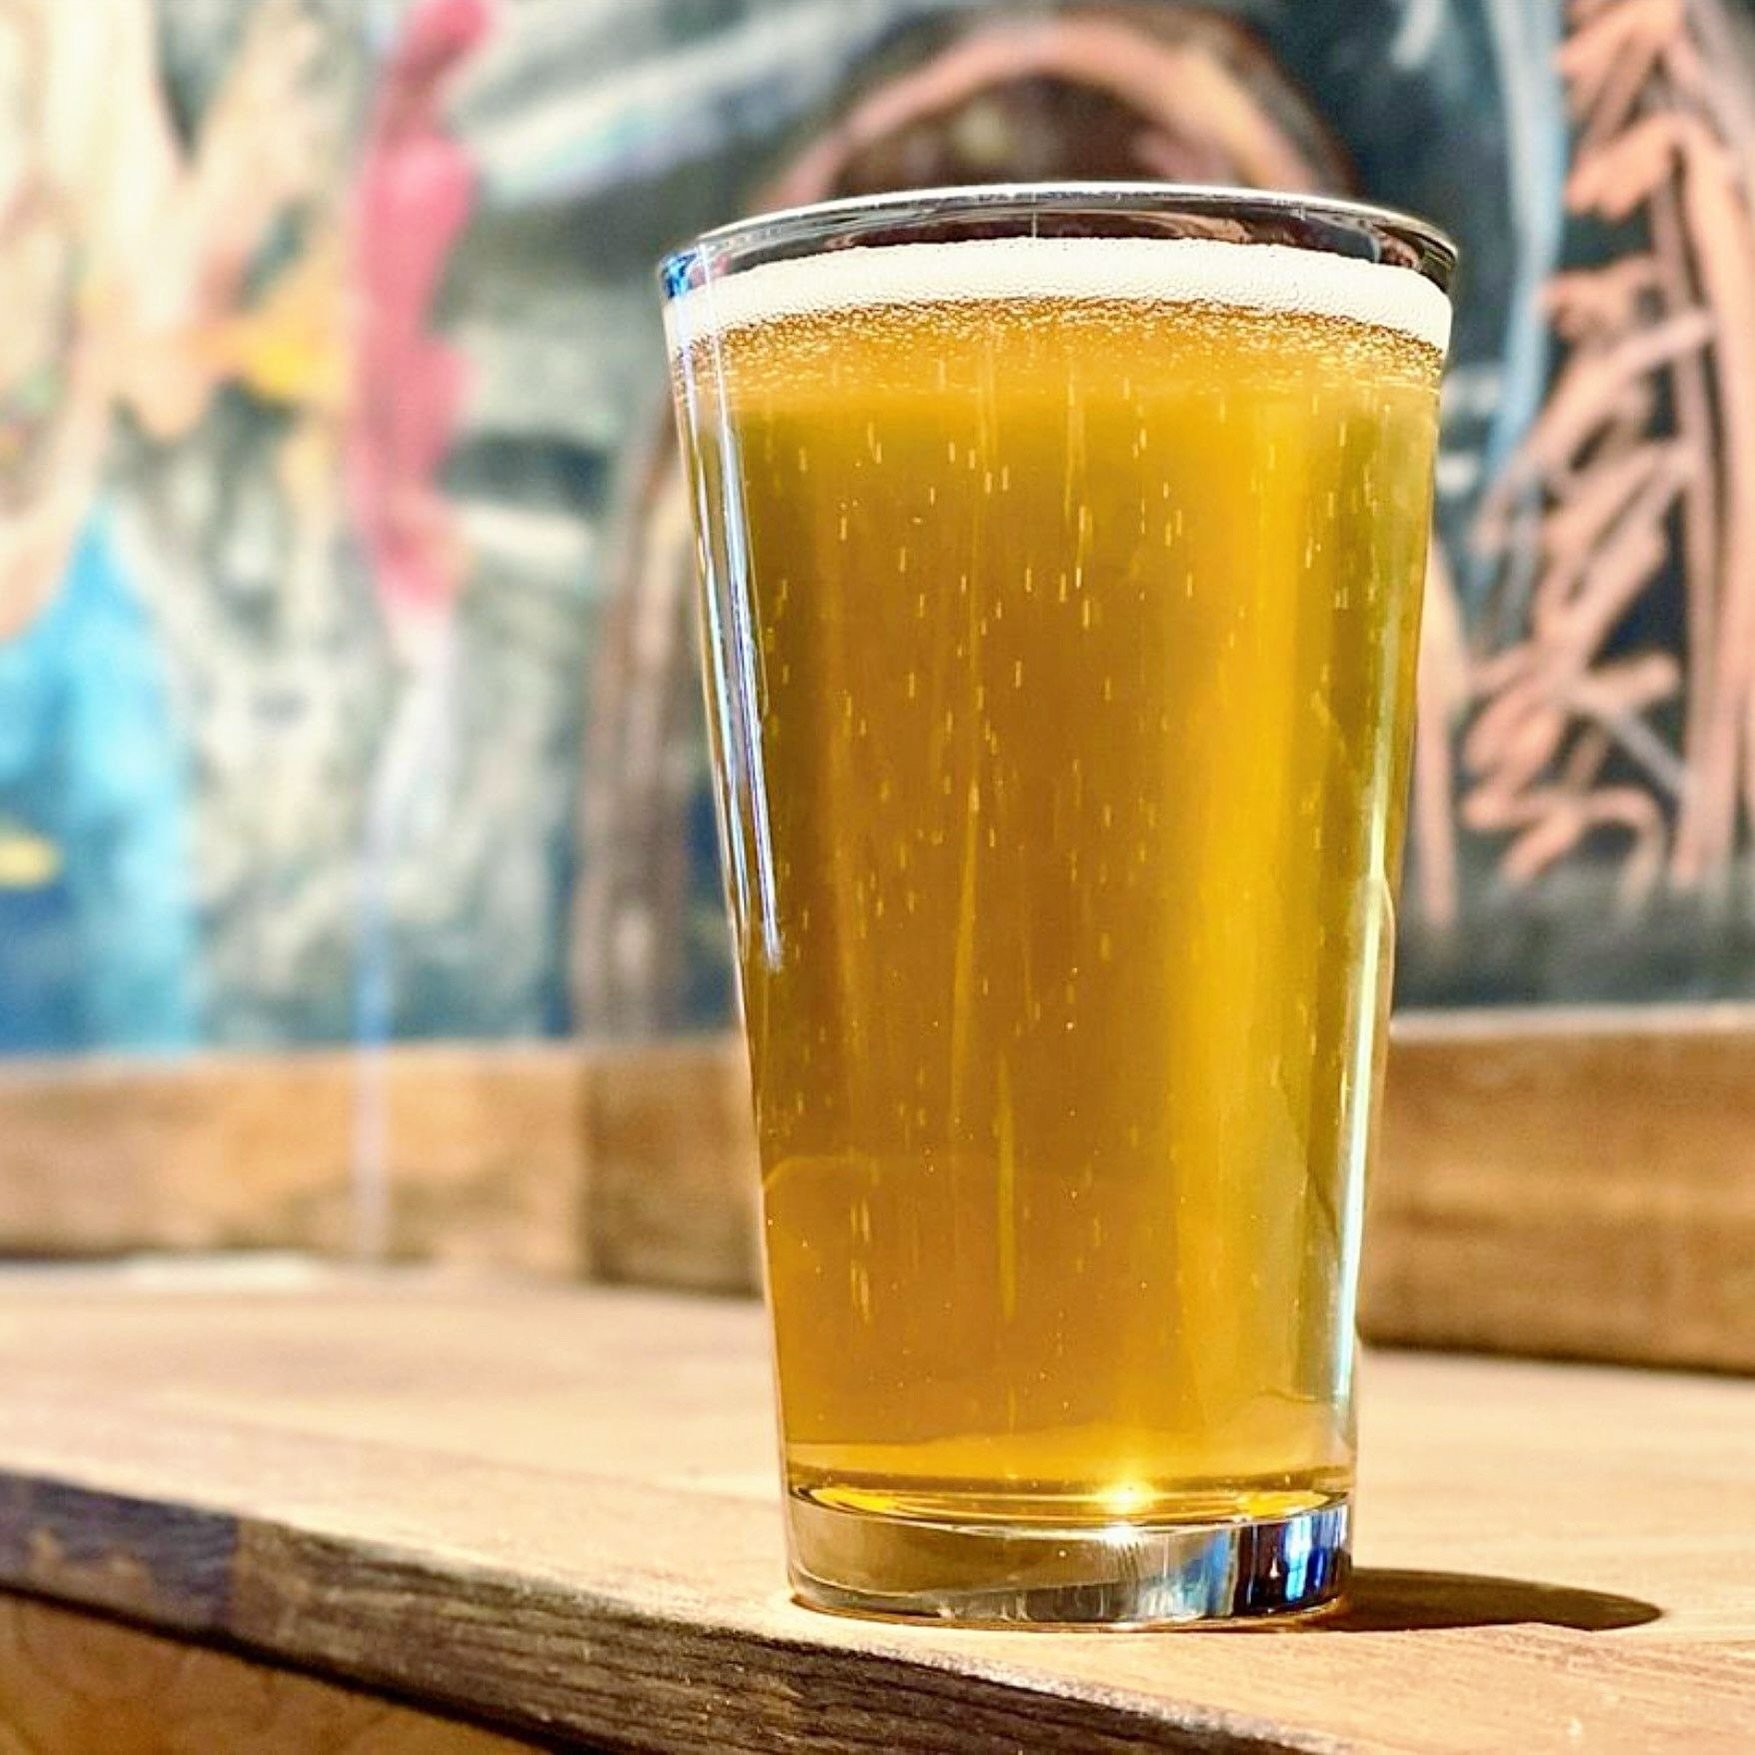 If summertime will have you hankerin&rsquo; for burgers and beer, come on down and try Grass Fed - our exclusive house lager from Redemption Rock Brewing! 🍻⁠
⁠
Grass Fed is an American Pilsner brewed entirely with local ingredients &ndash; Pilsner a